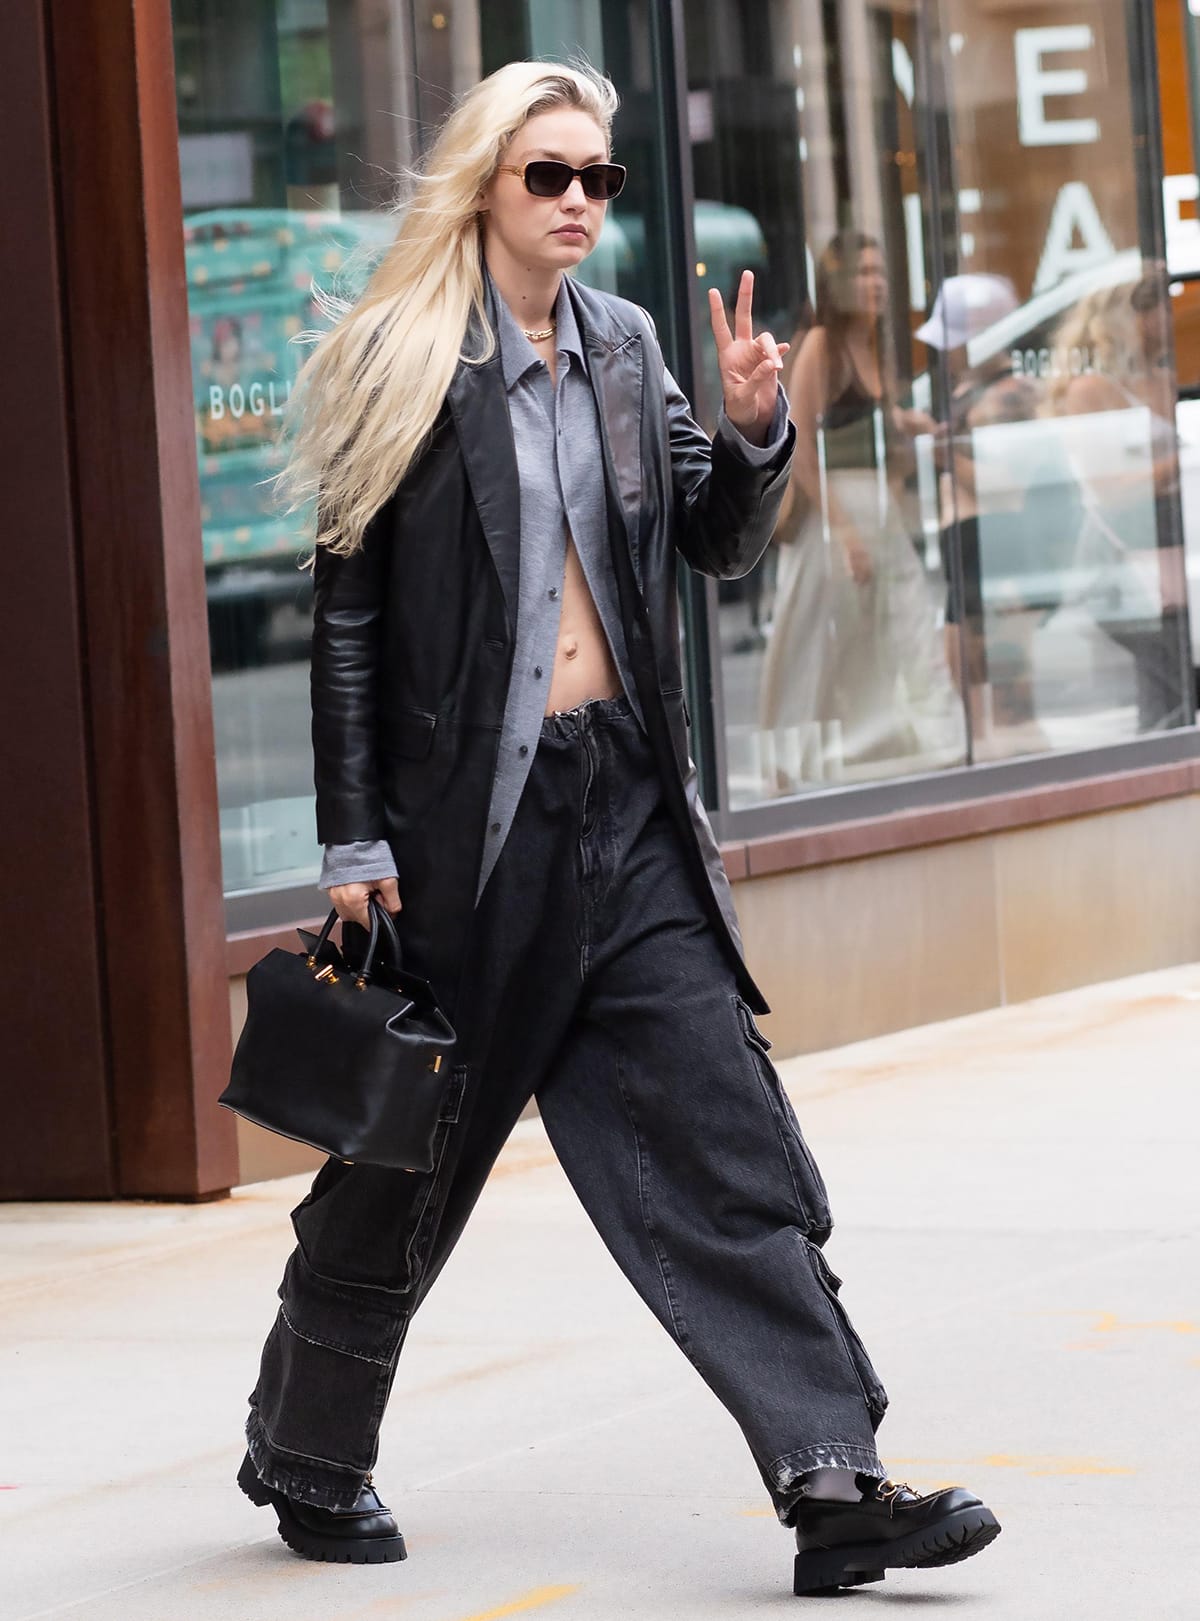 Gigi Hadid flashes her abs in a partially unbuttoned shirt teamed with Zadig & Voltaire leather jacket, cargo jeans, and Gucci loafers